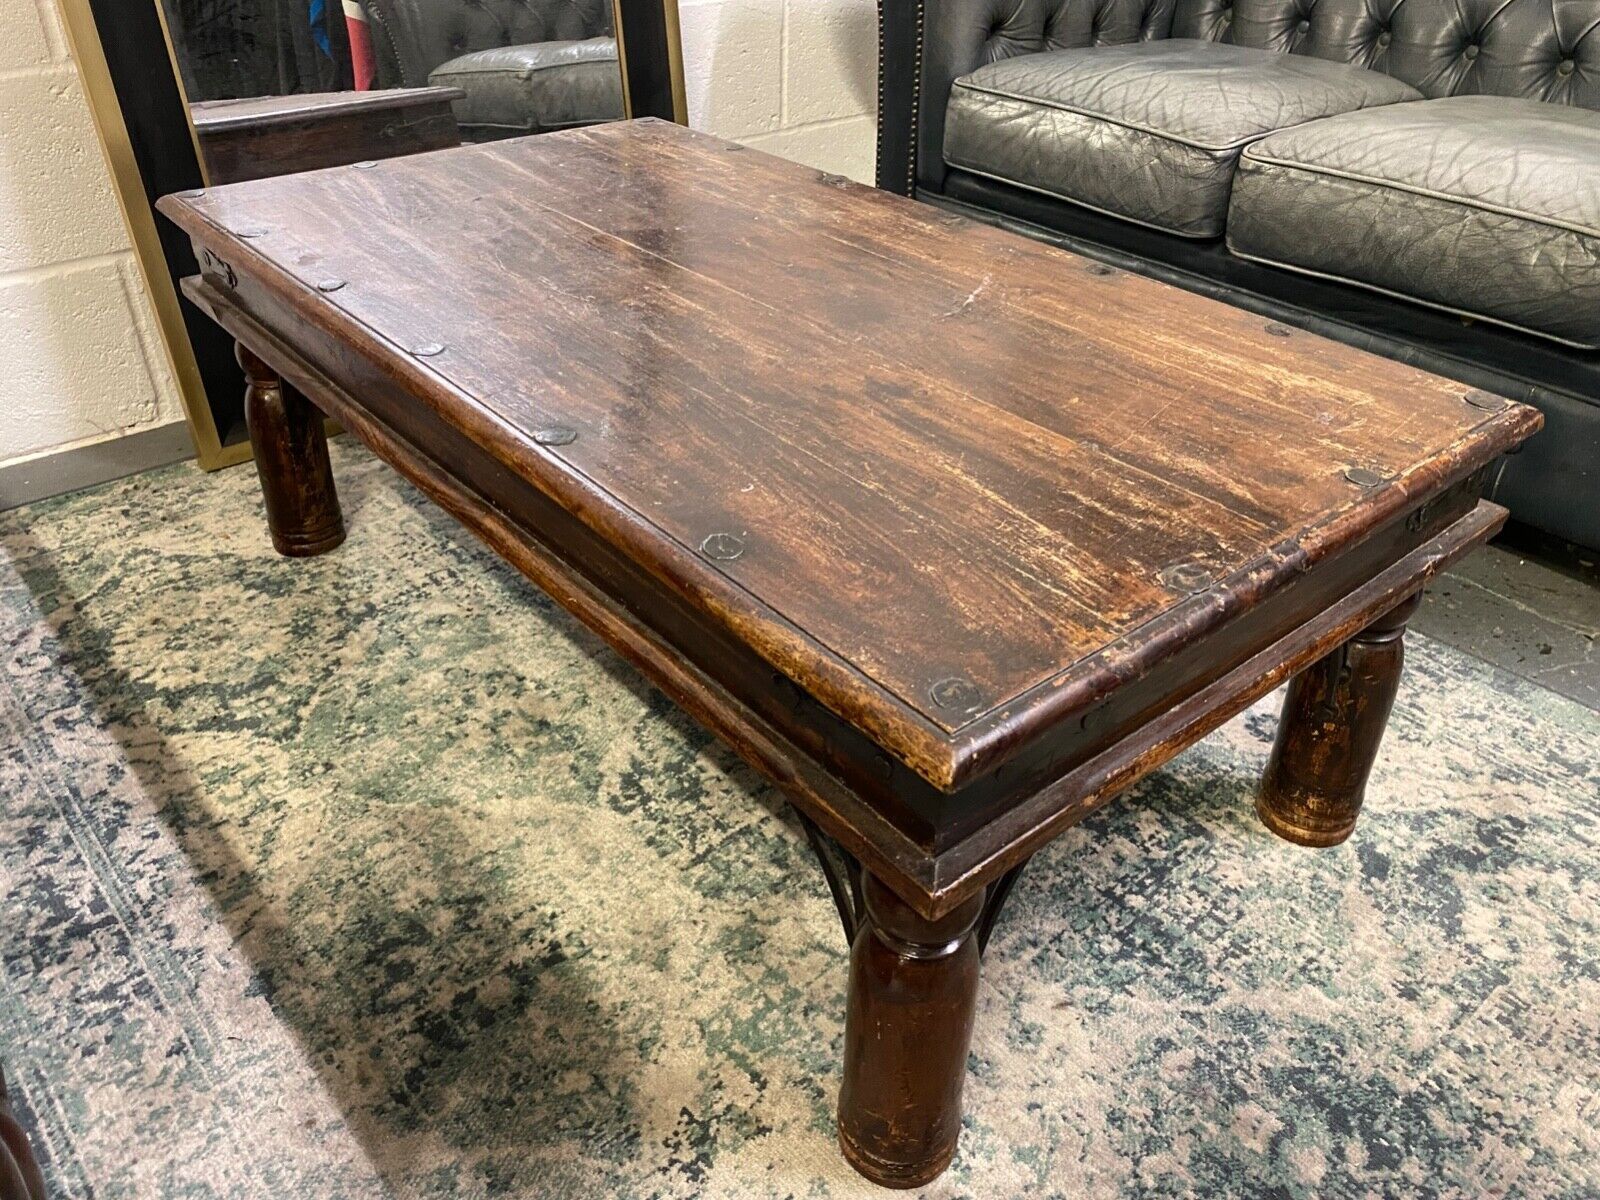 Antique Vintage Coffee Table Brown Solid Wood | Ebay Throughout Reclaimed Vintage Coffee Tables (View 13 of 20)